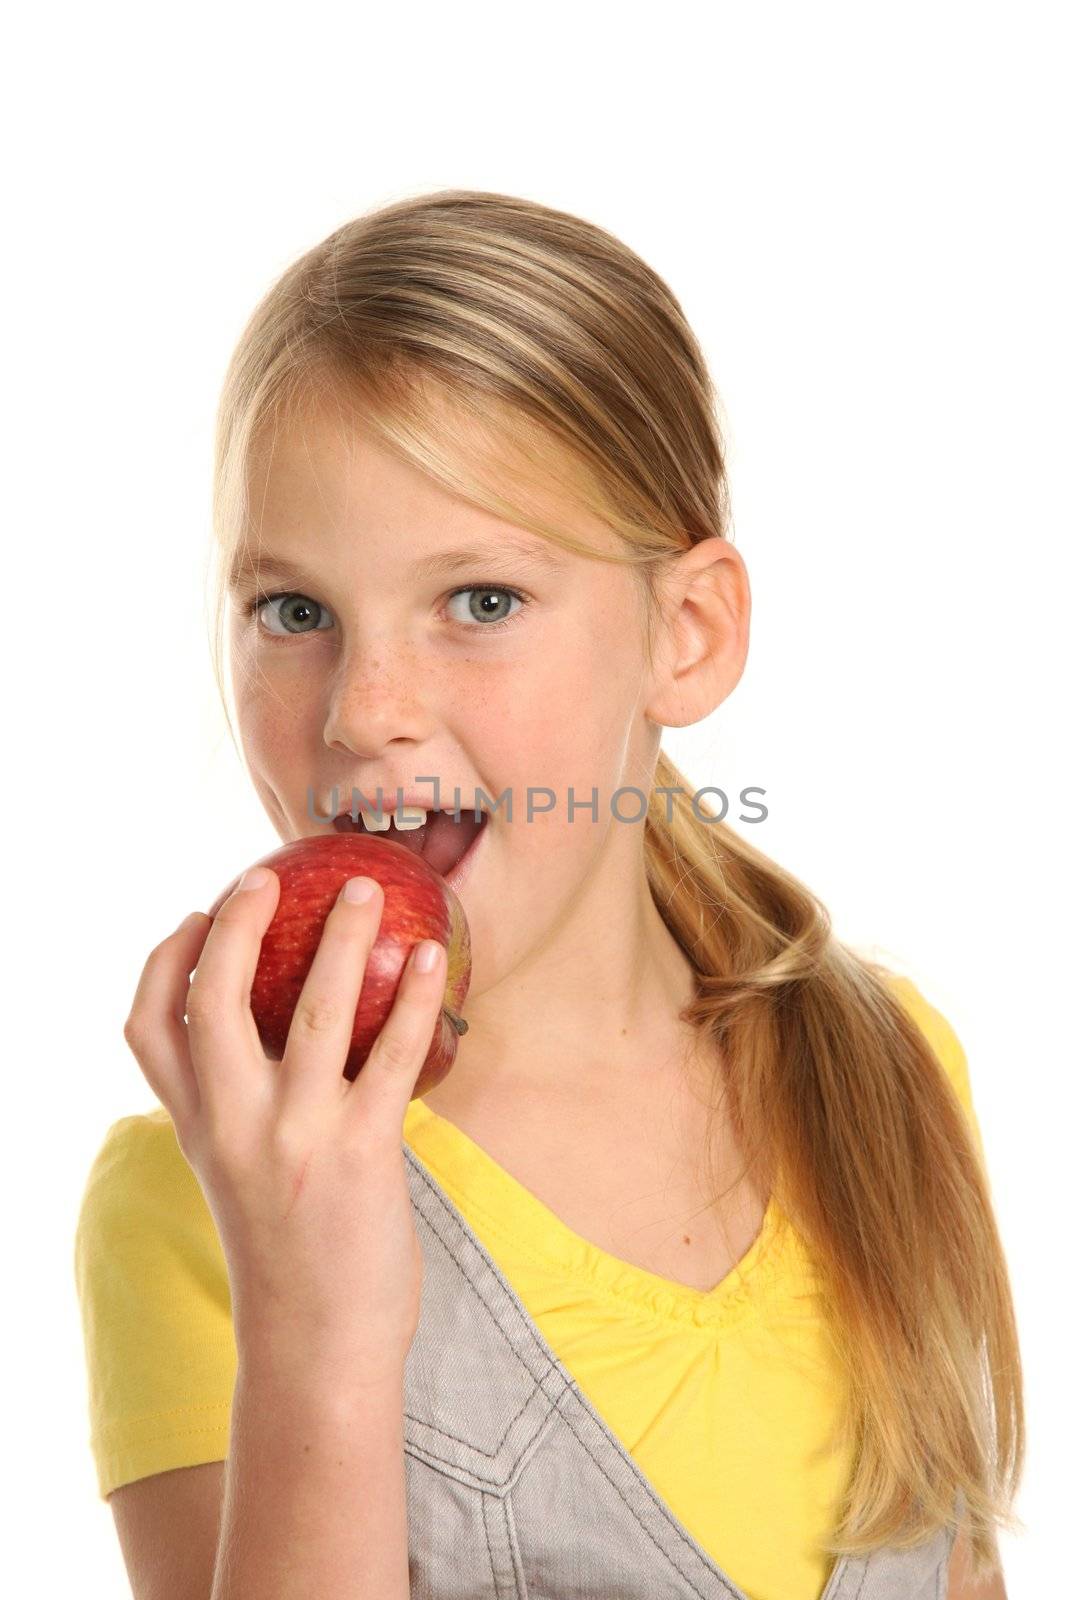 Pretty young school girl taking a bite out of a juicy red apple